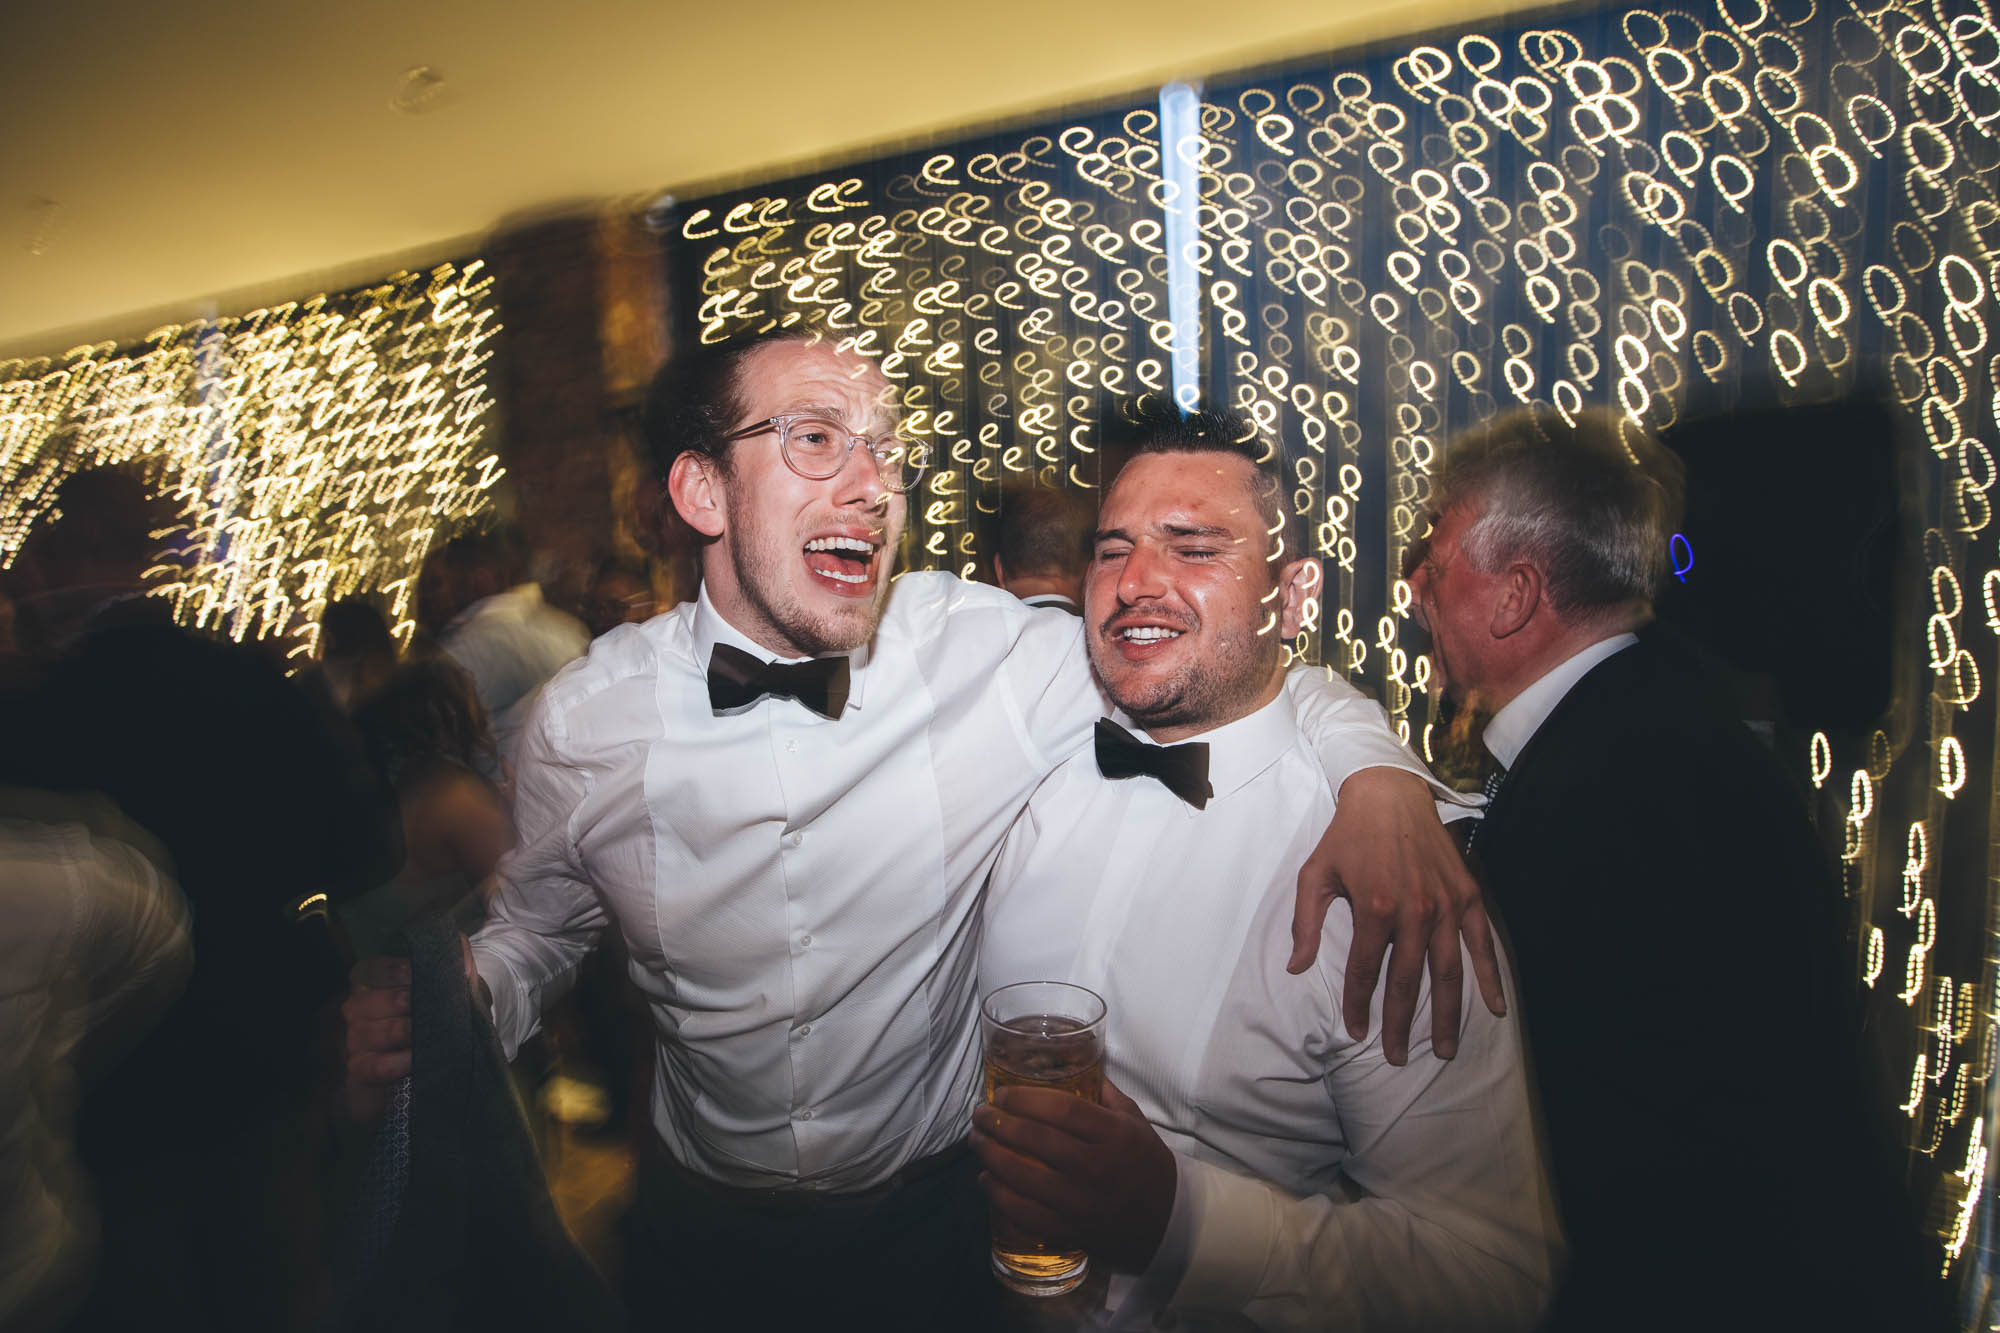 Groomsmen get rowdy singing with pints at wedding reception